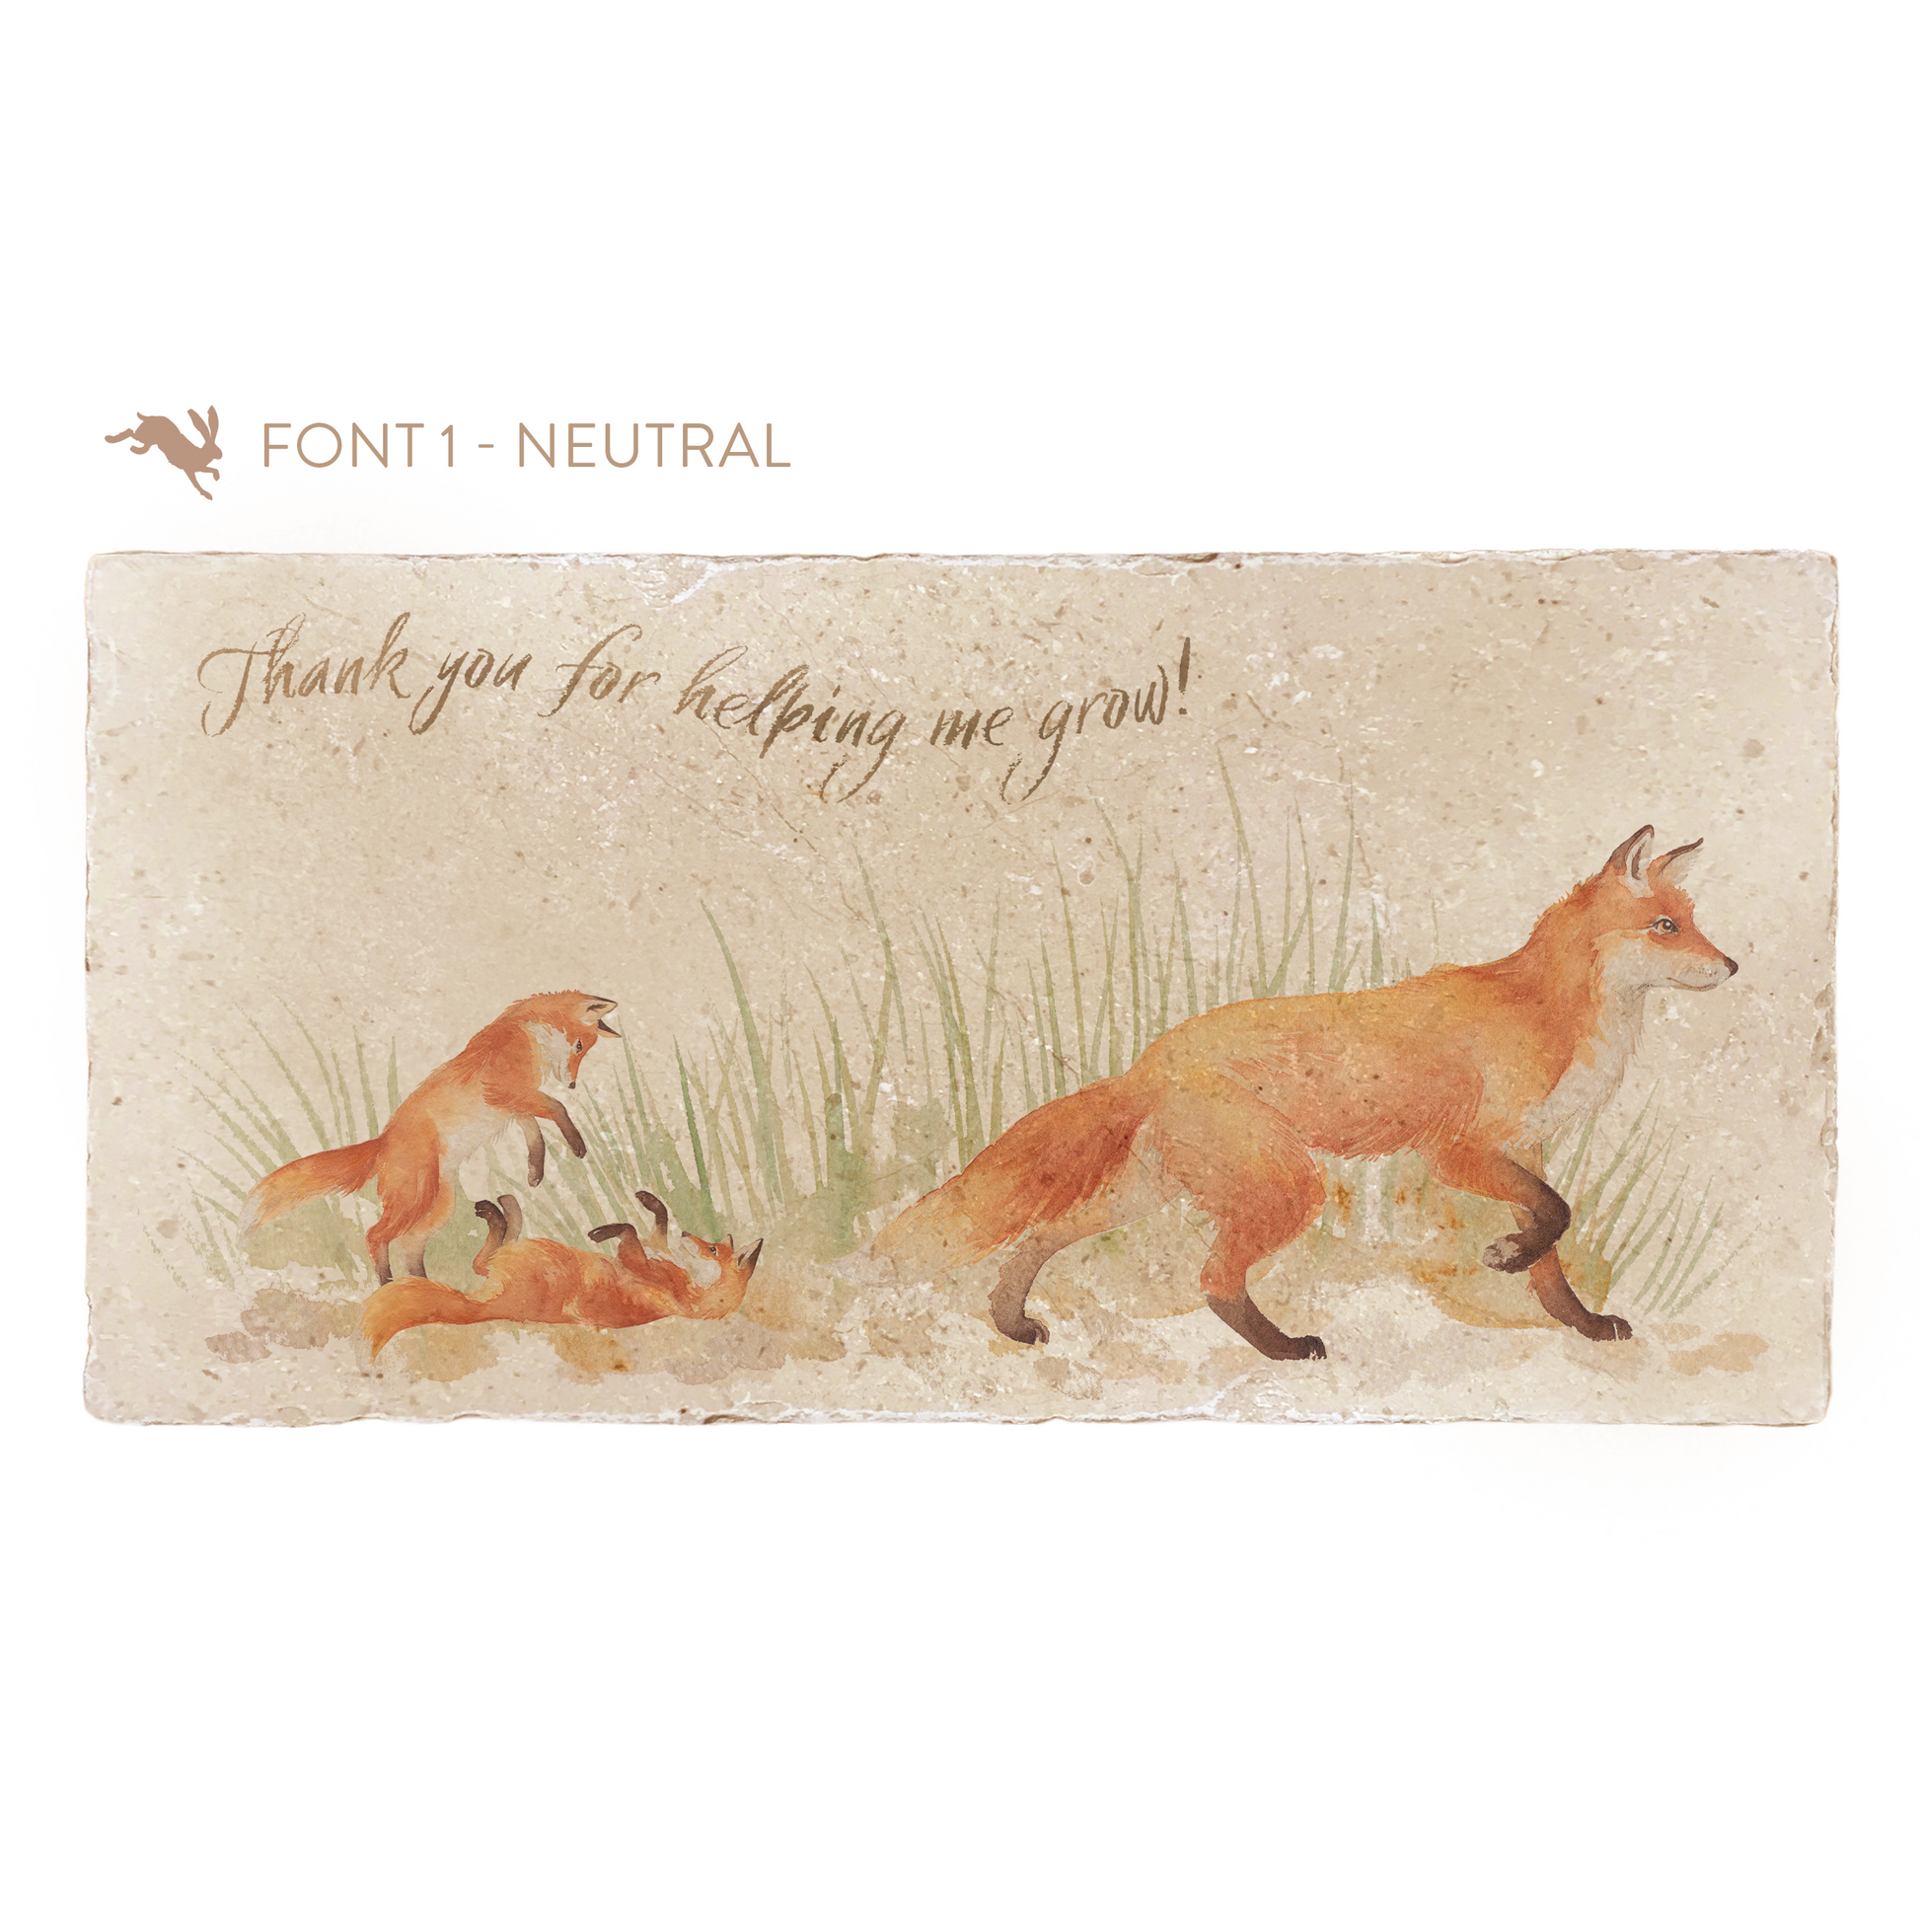 A personalised rectangular marble sharing platter featuring a fox design. The example personalised neutral colour text reads 'Thank you for helping me grow' in a brush script font.